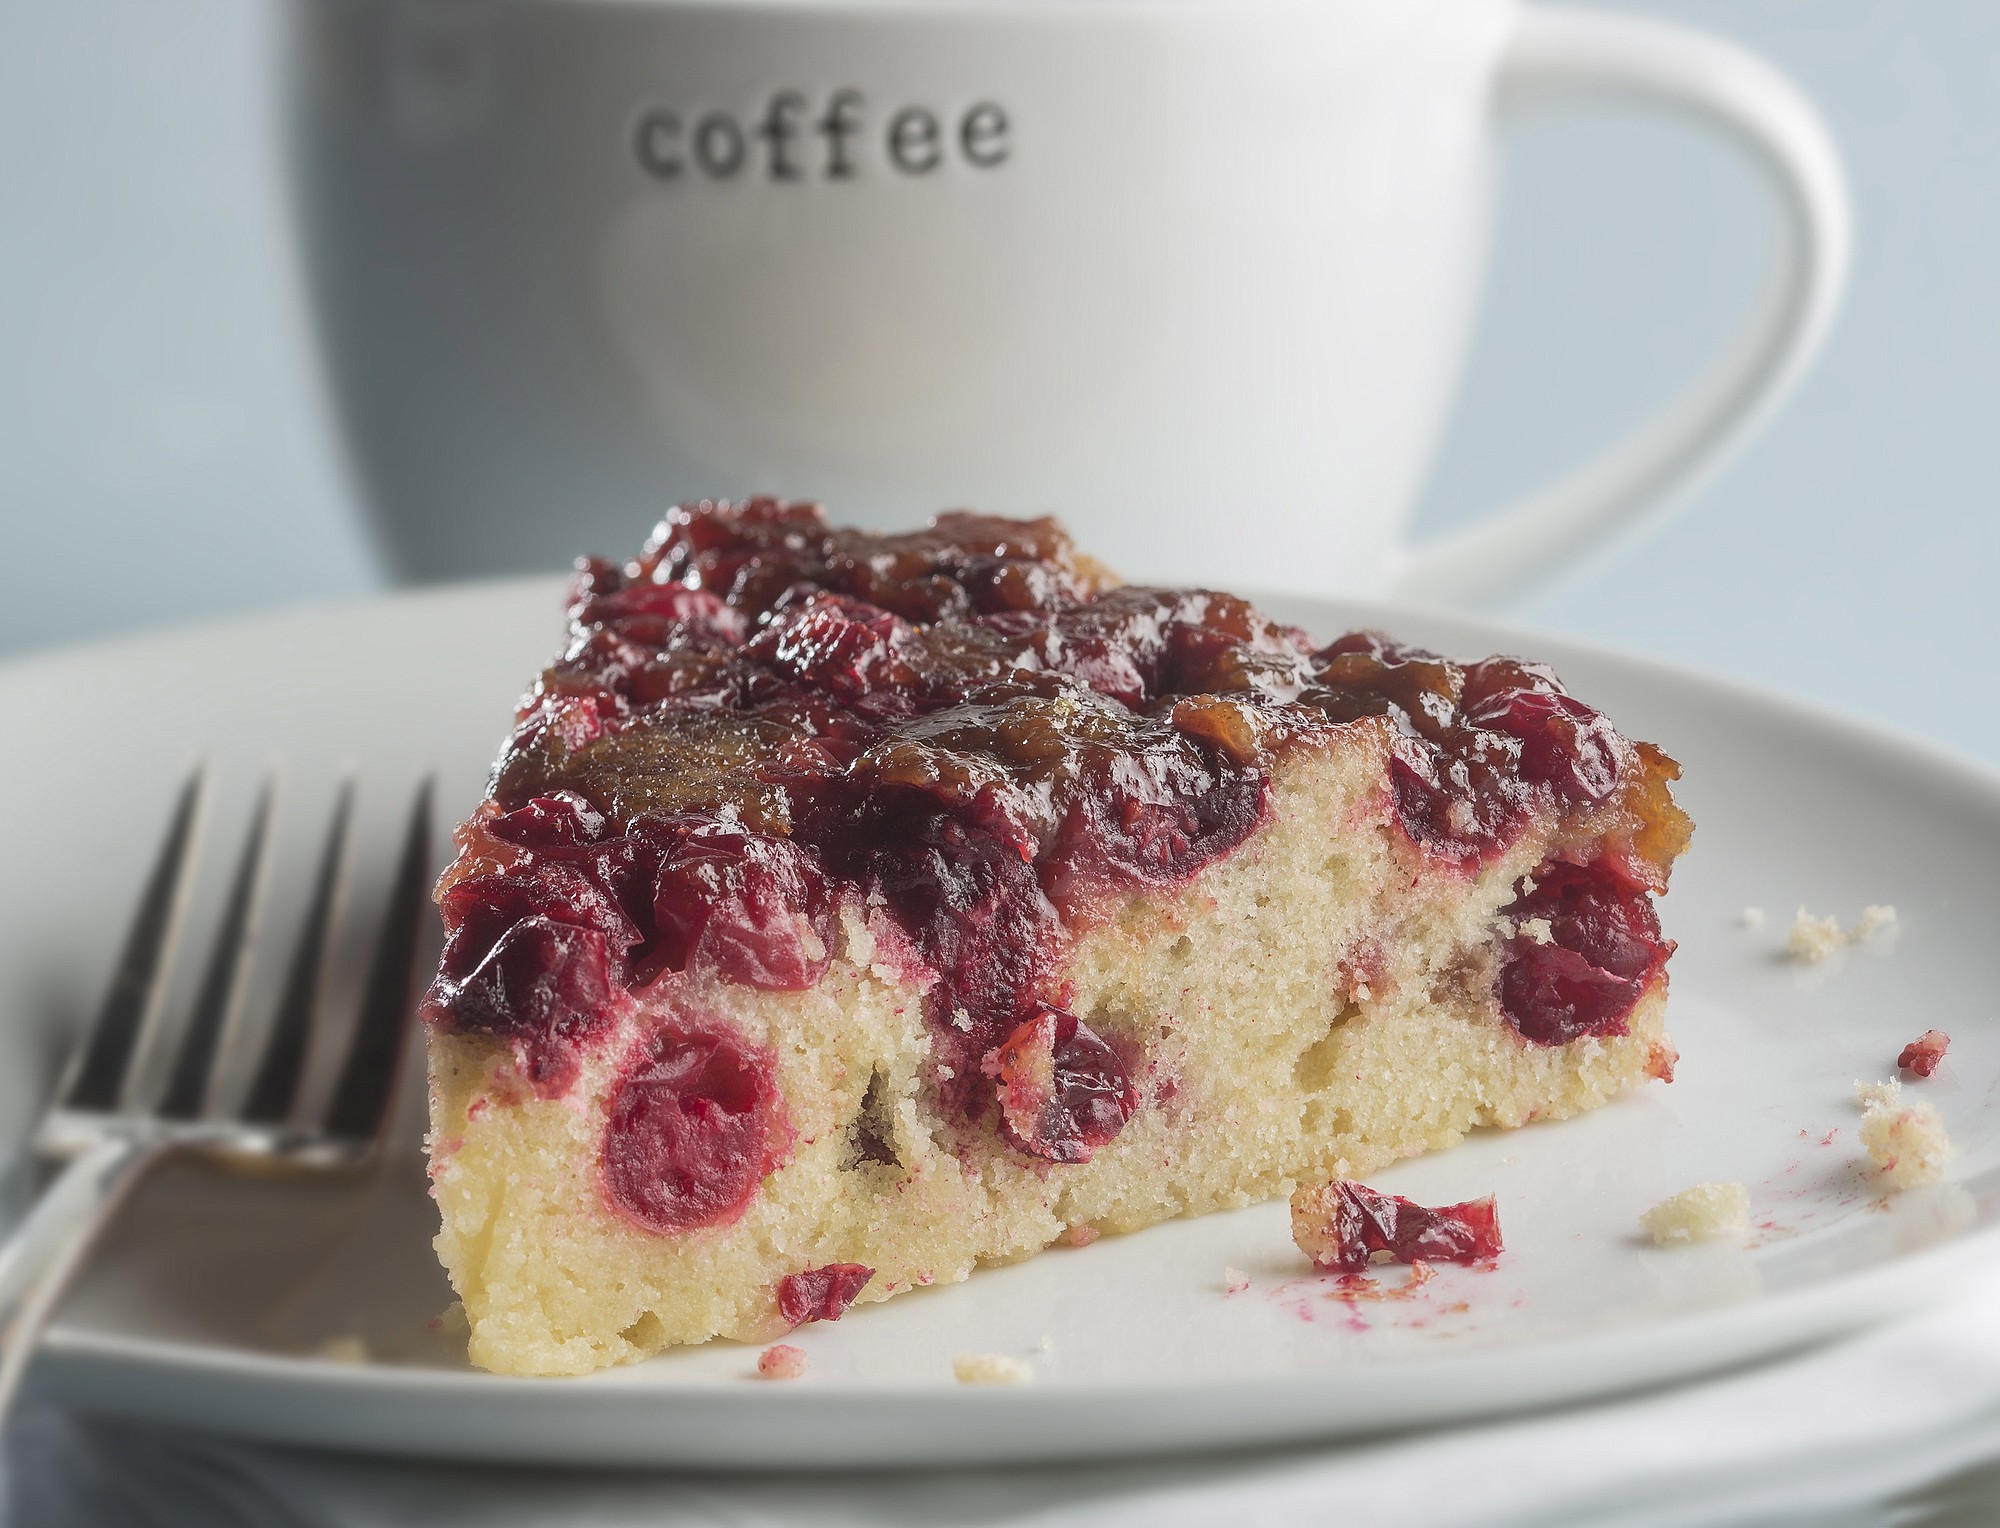 Cranberries and oranges come together in this upside-down cake.